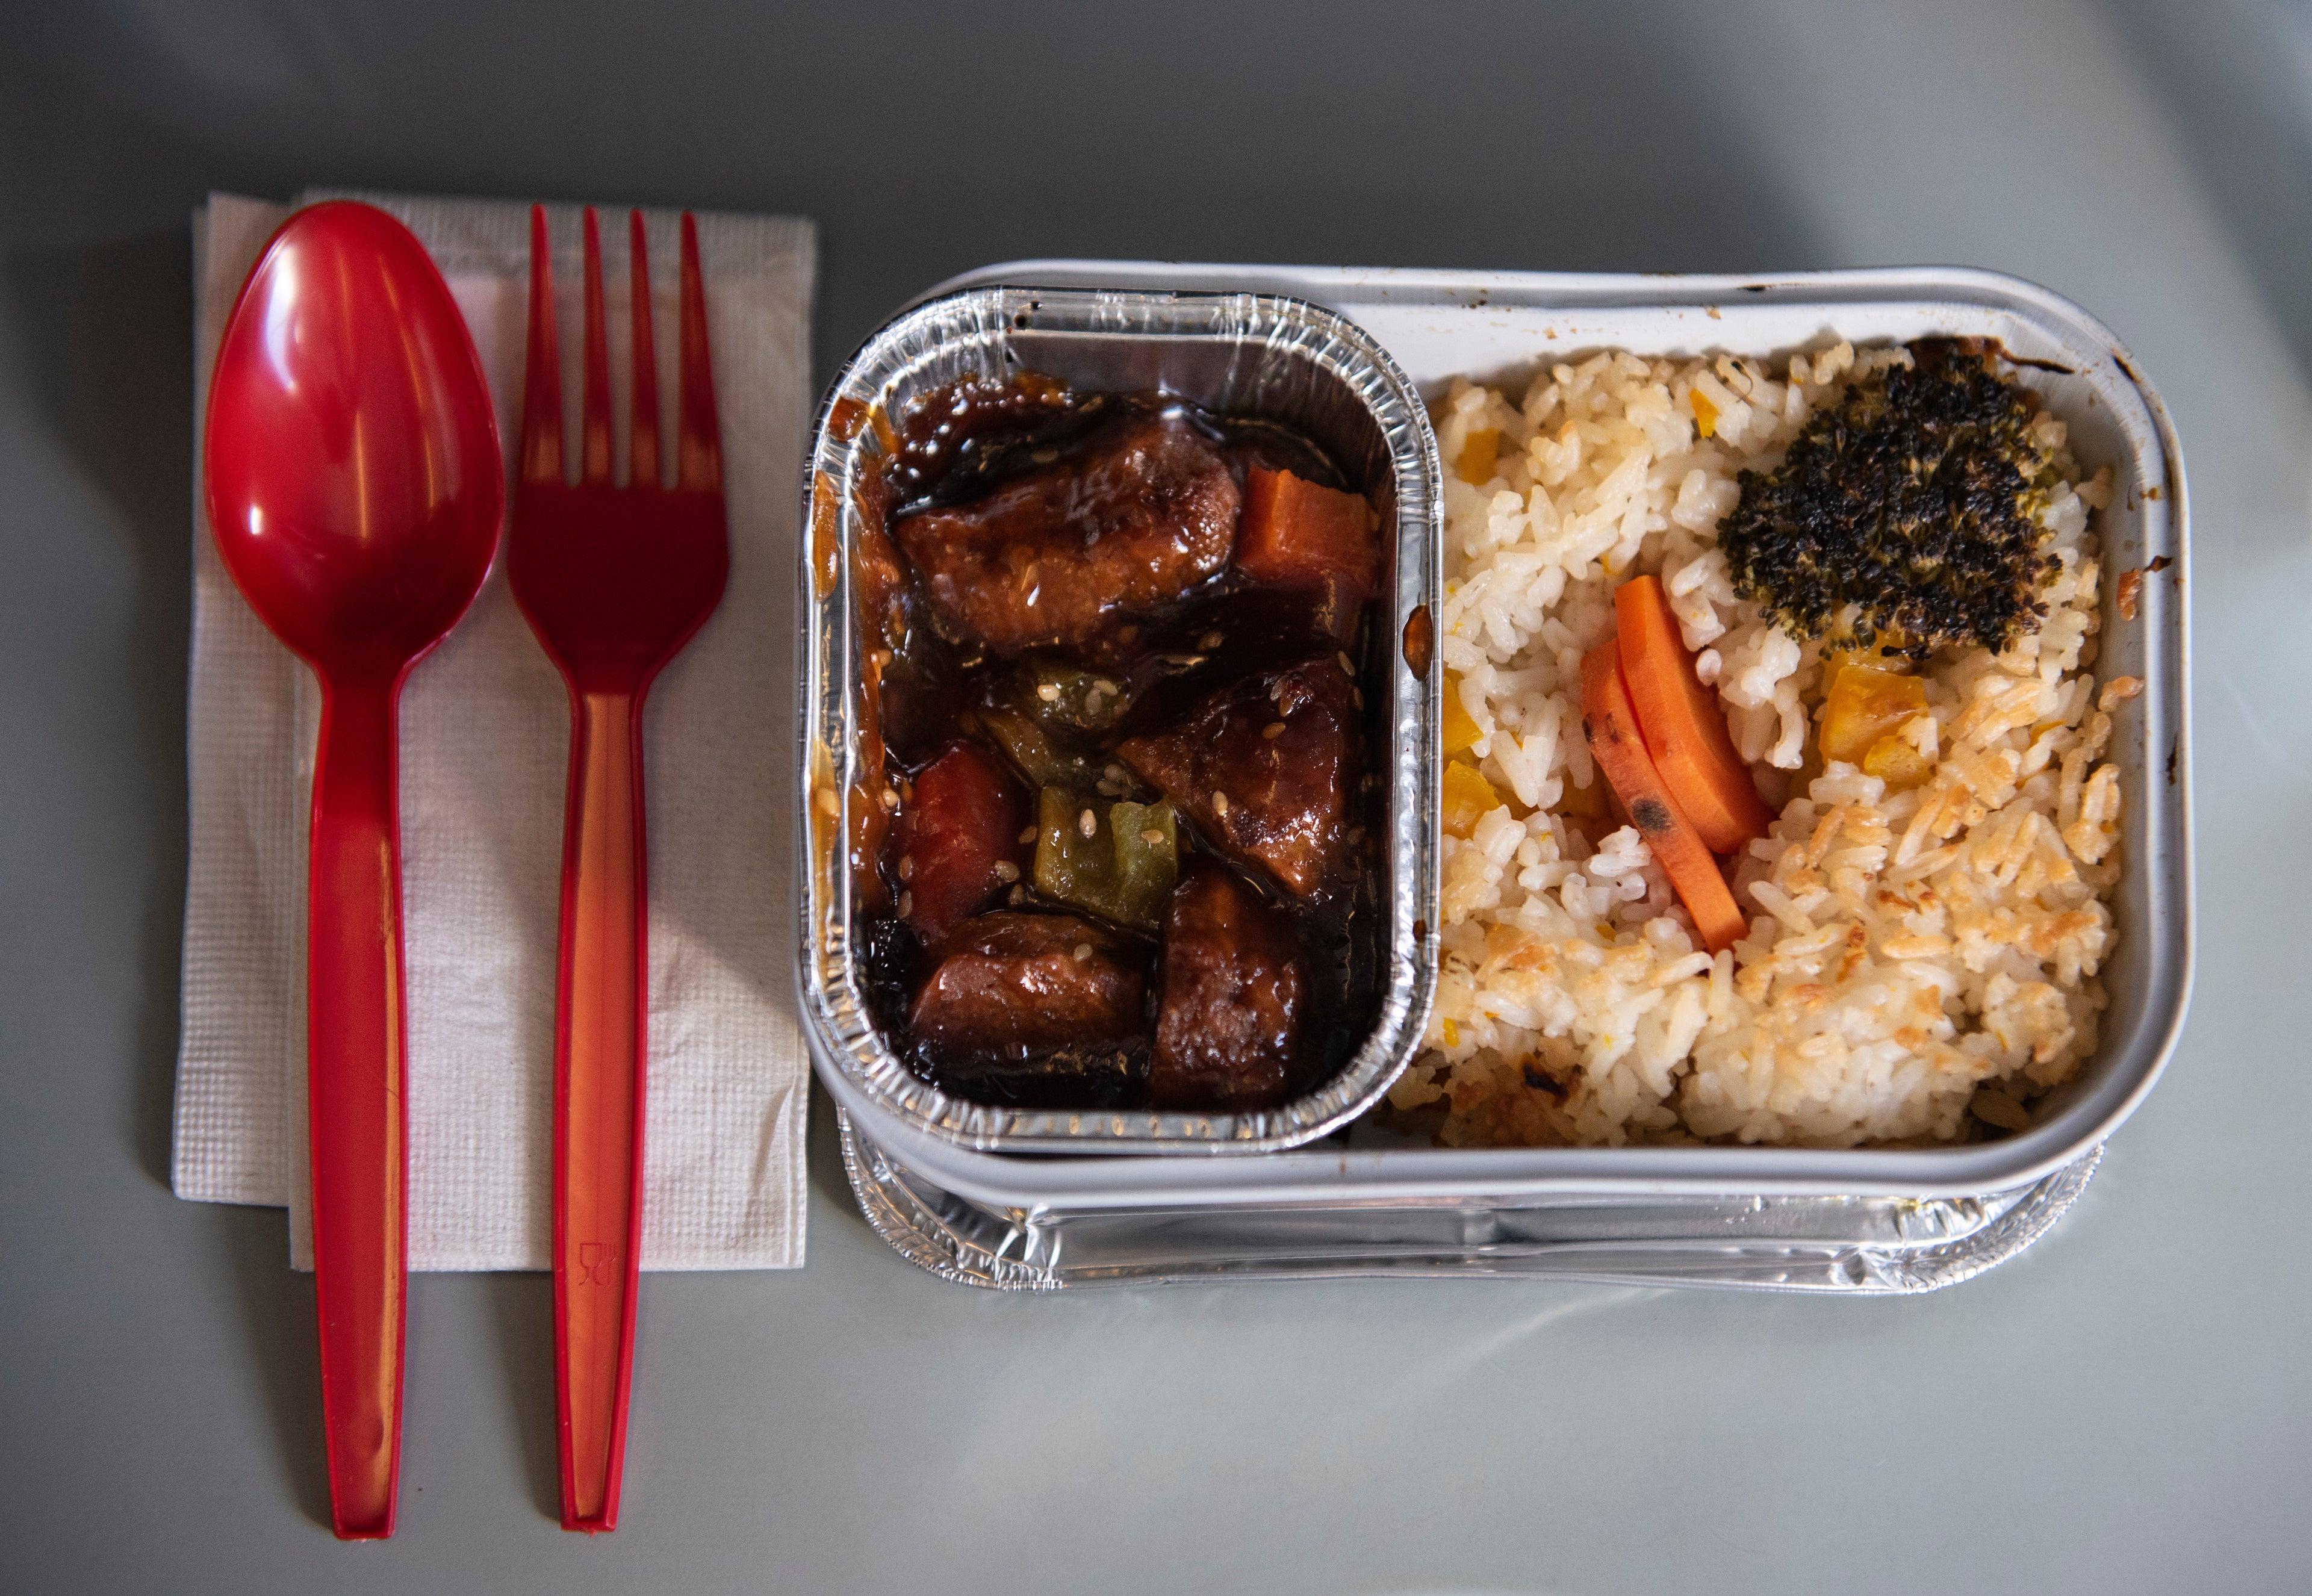 An AirAsia airline meal seen during the flight